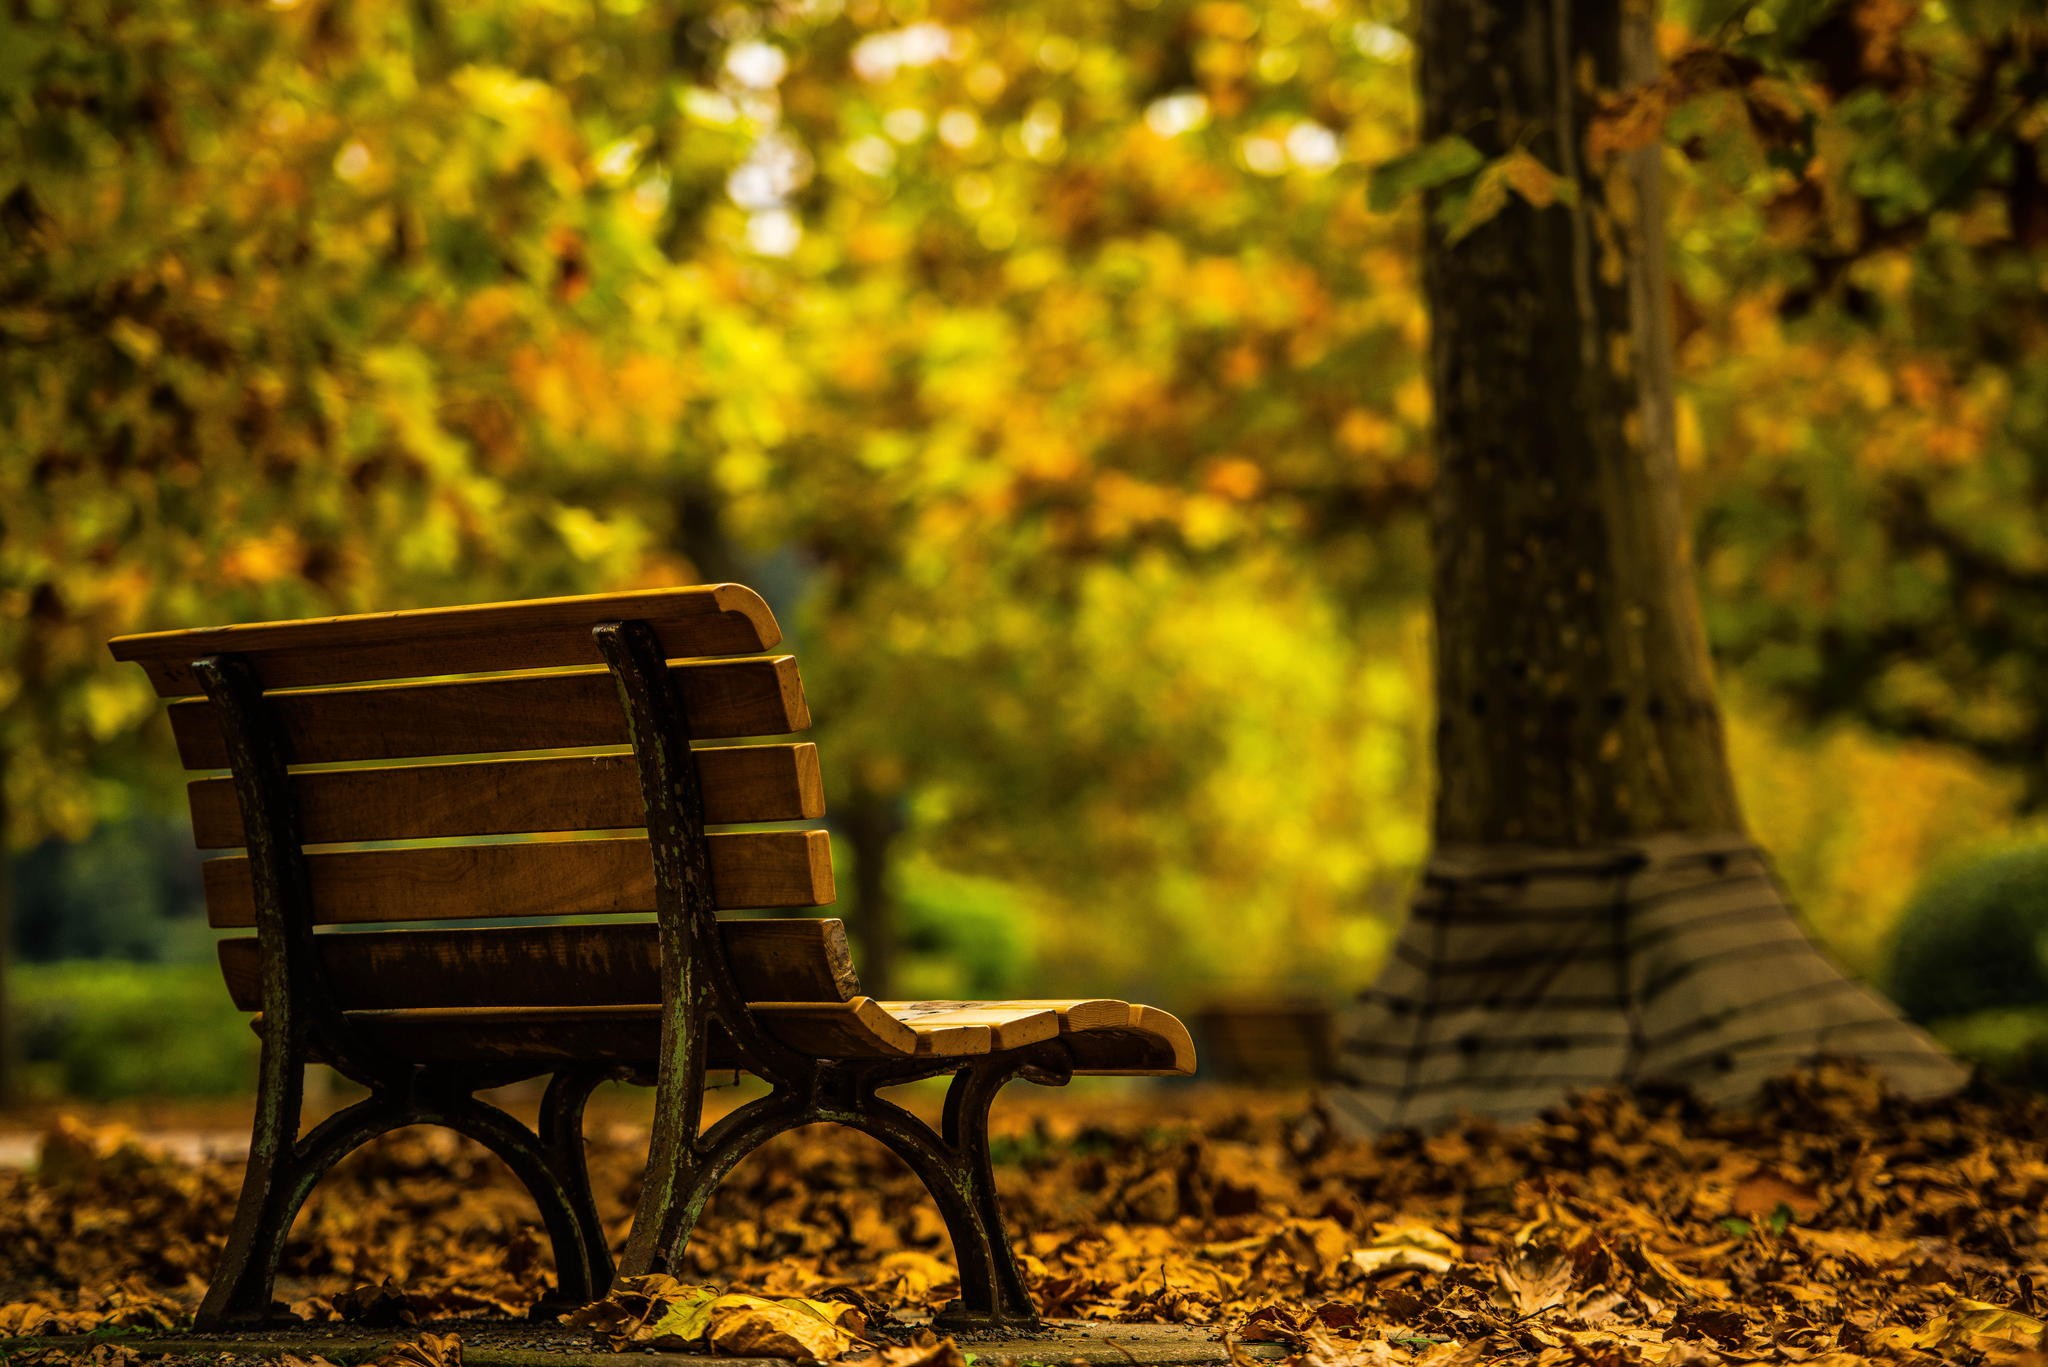 General 2048x1367 trees fall alone bench park outdoors fallen leaves